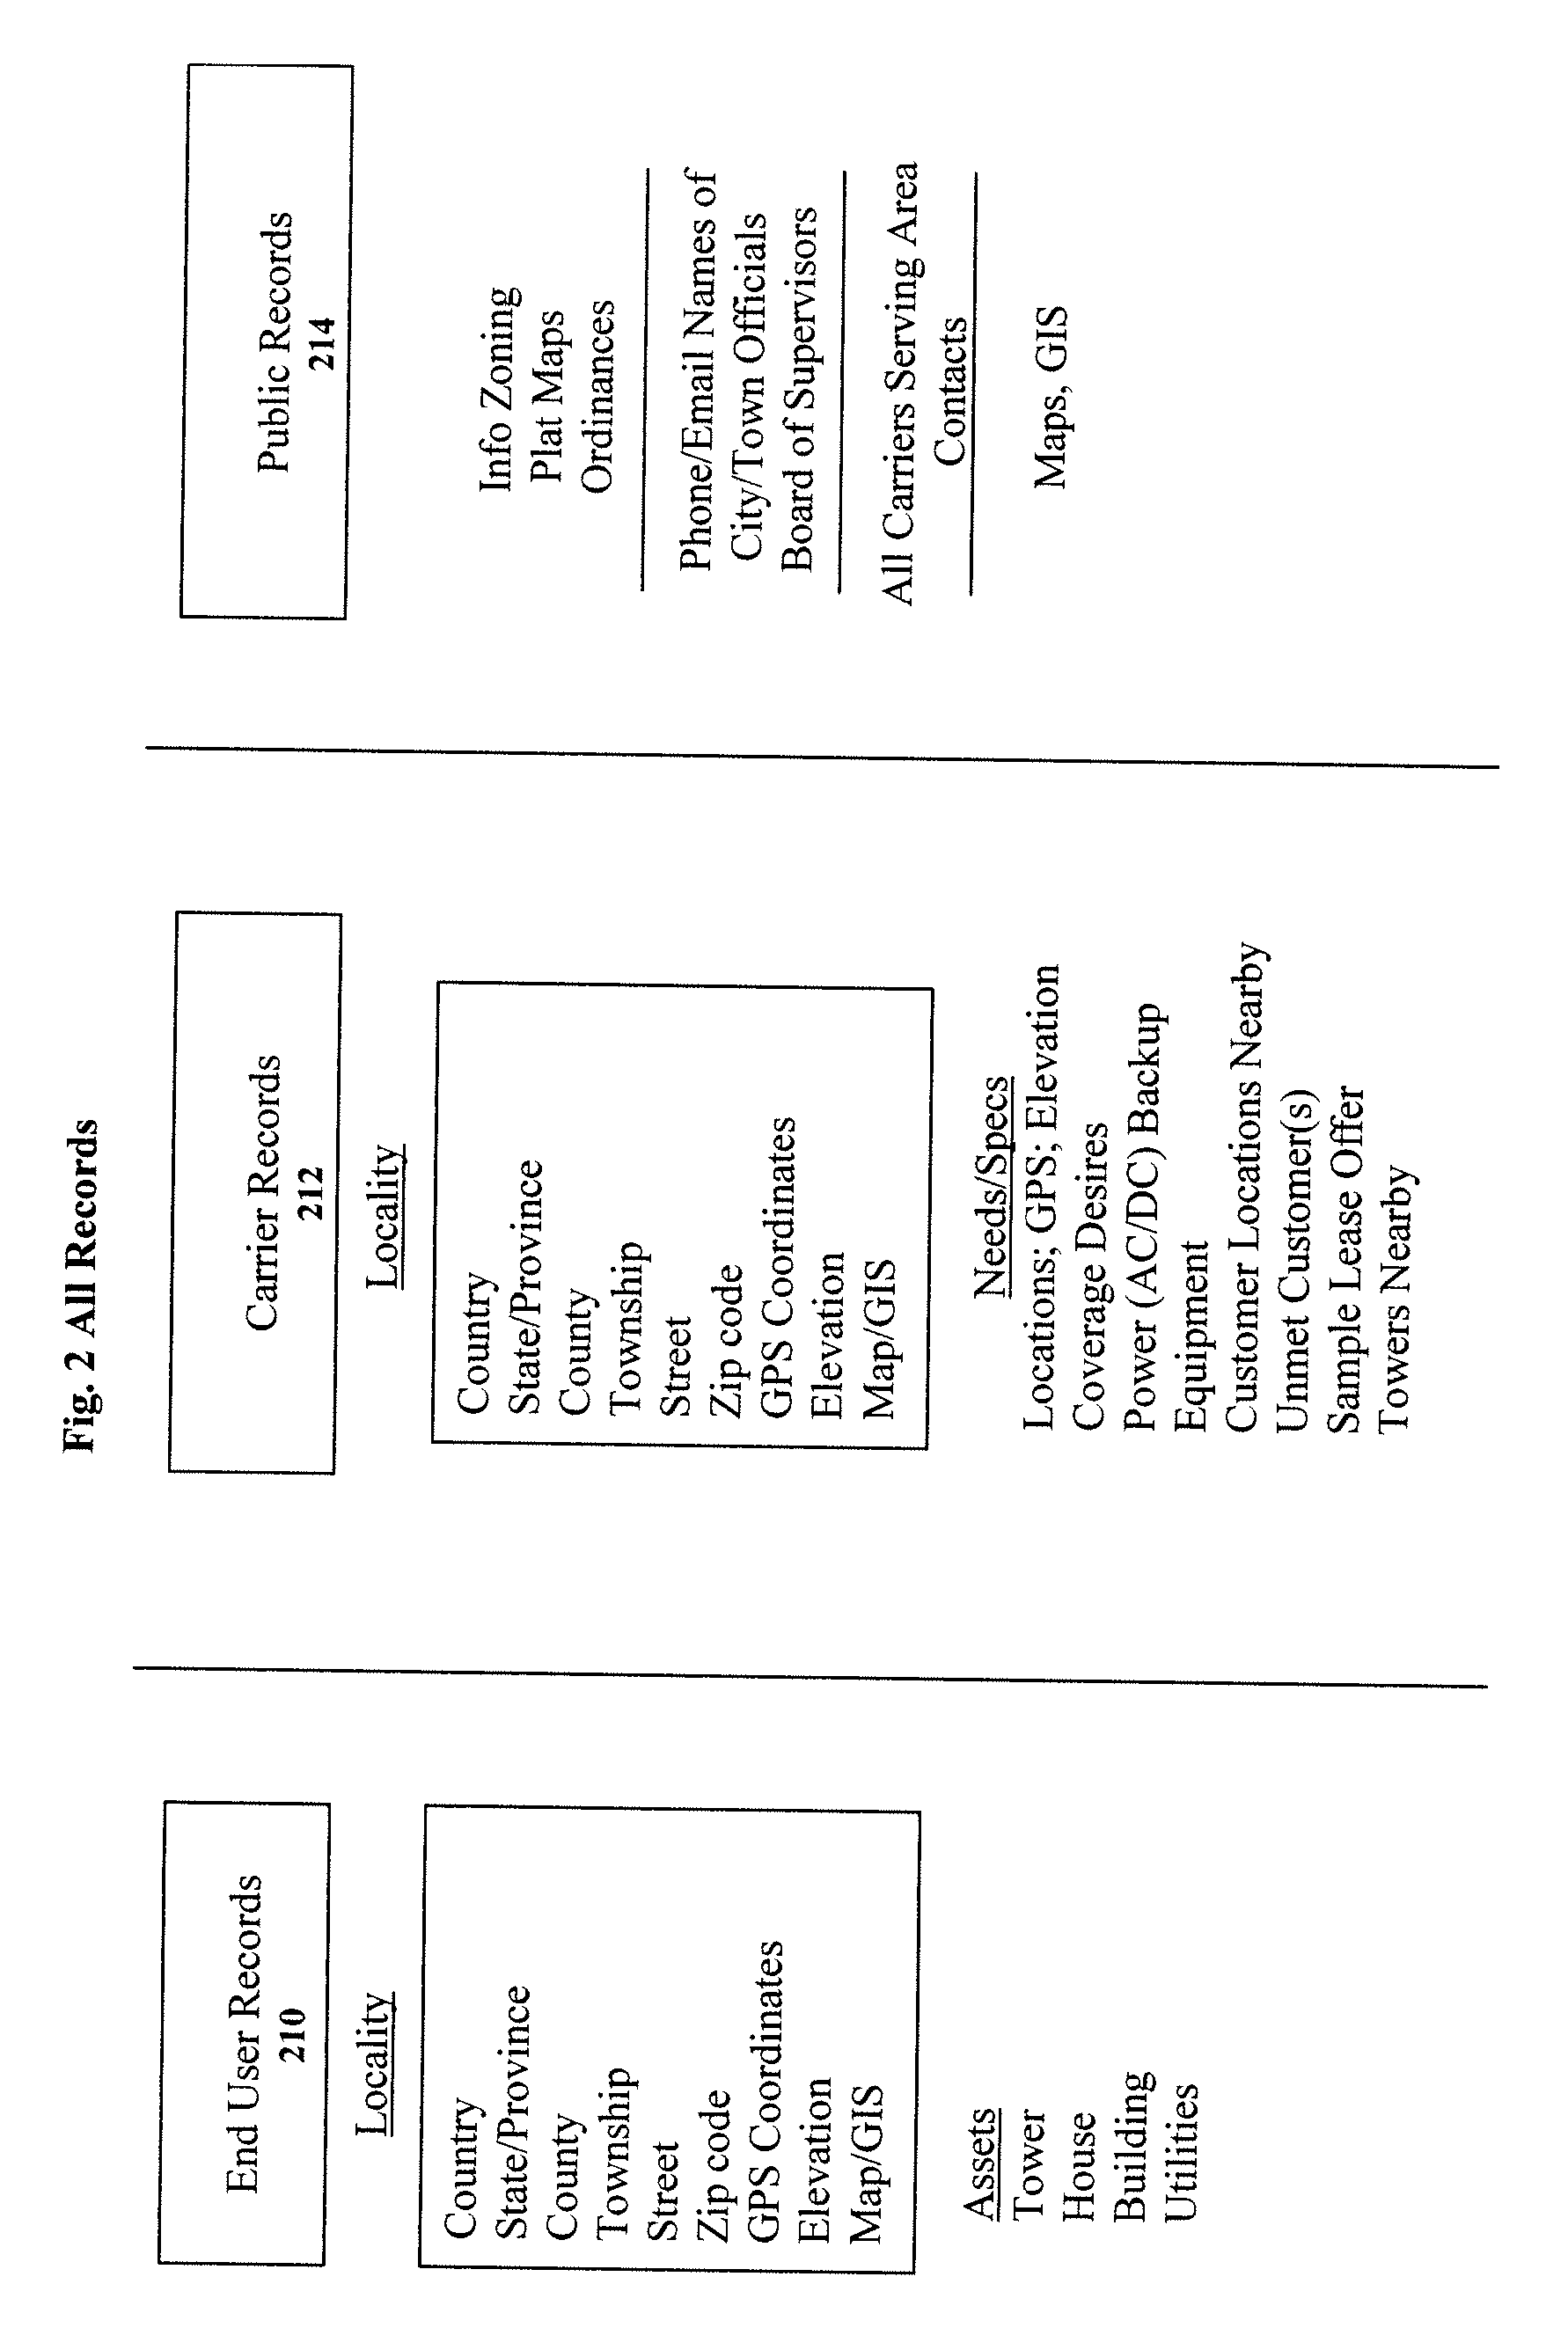 Clearinghouse System and Method for Enhancing the Quality, Operation and Accessibility of Carrier-Based Networks